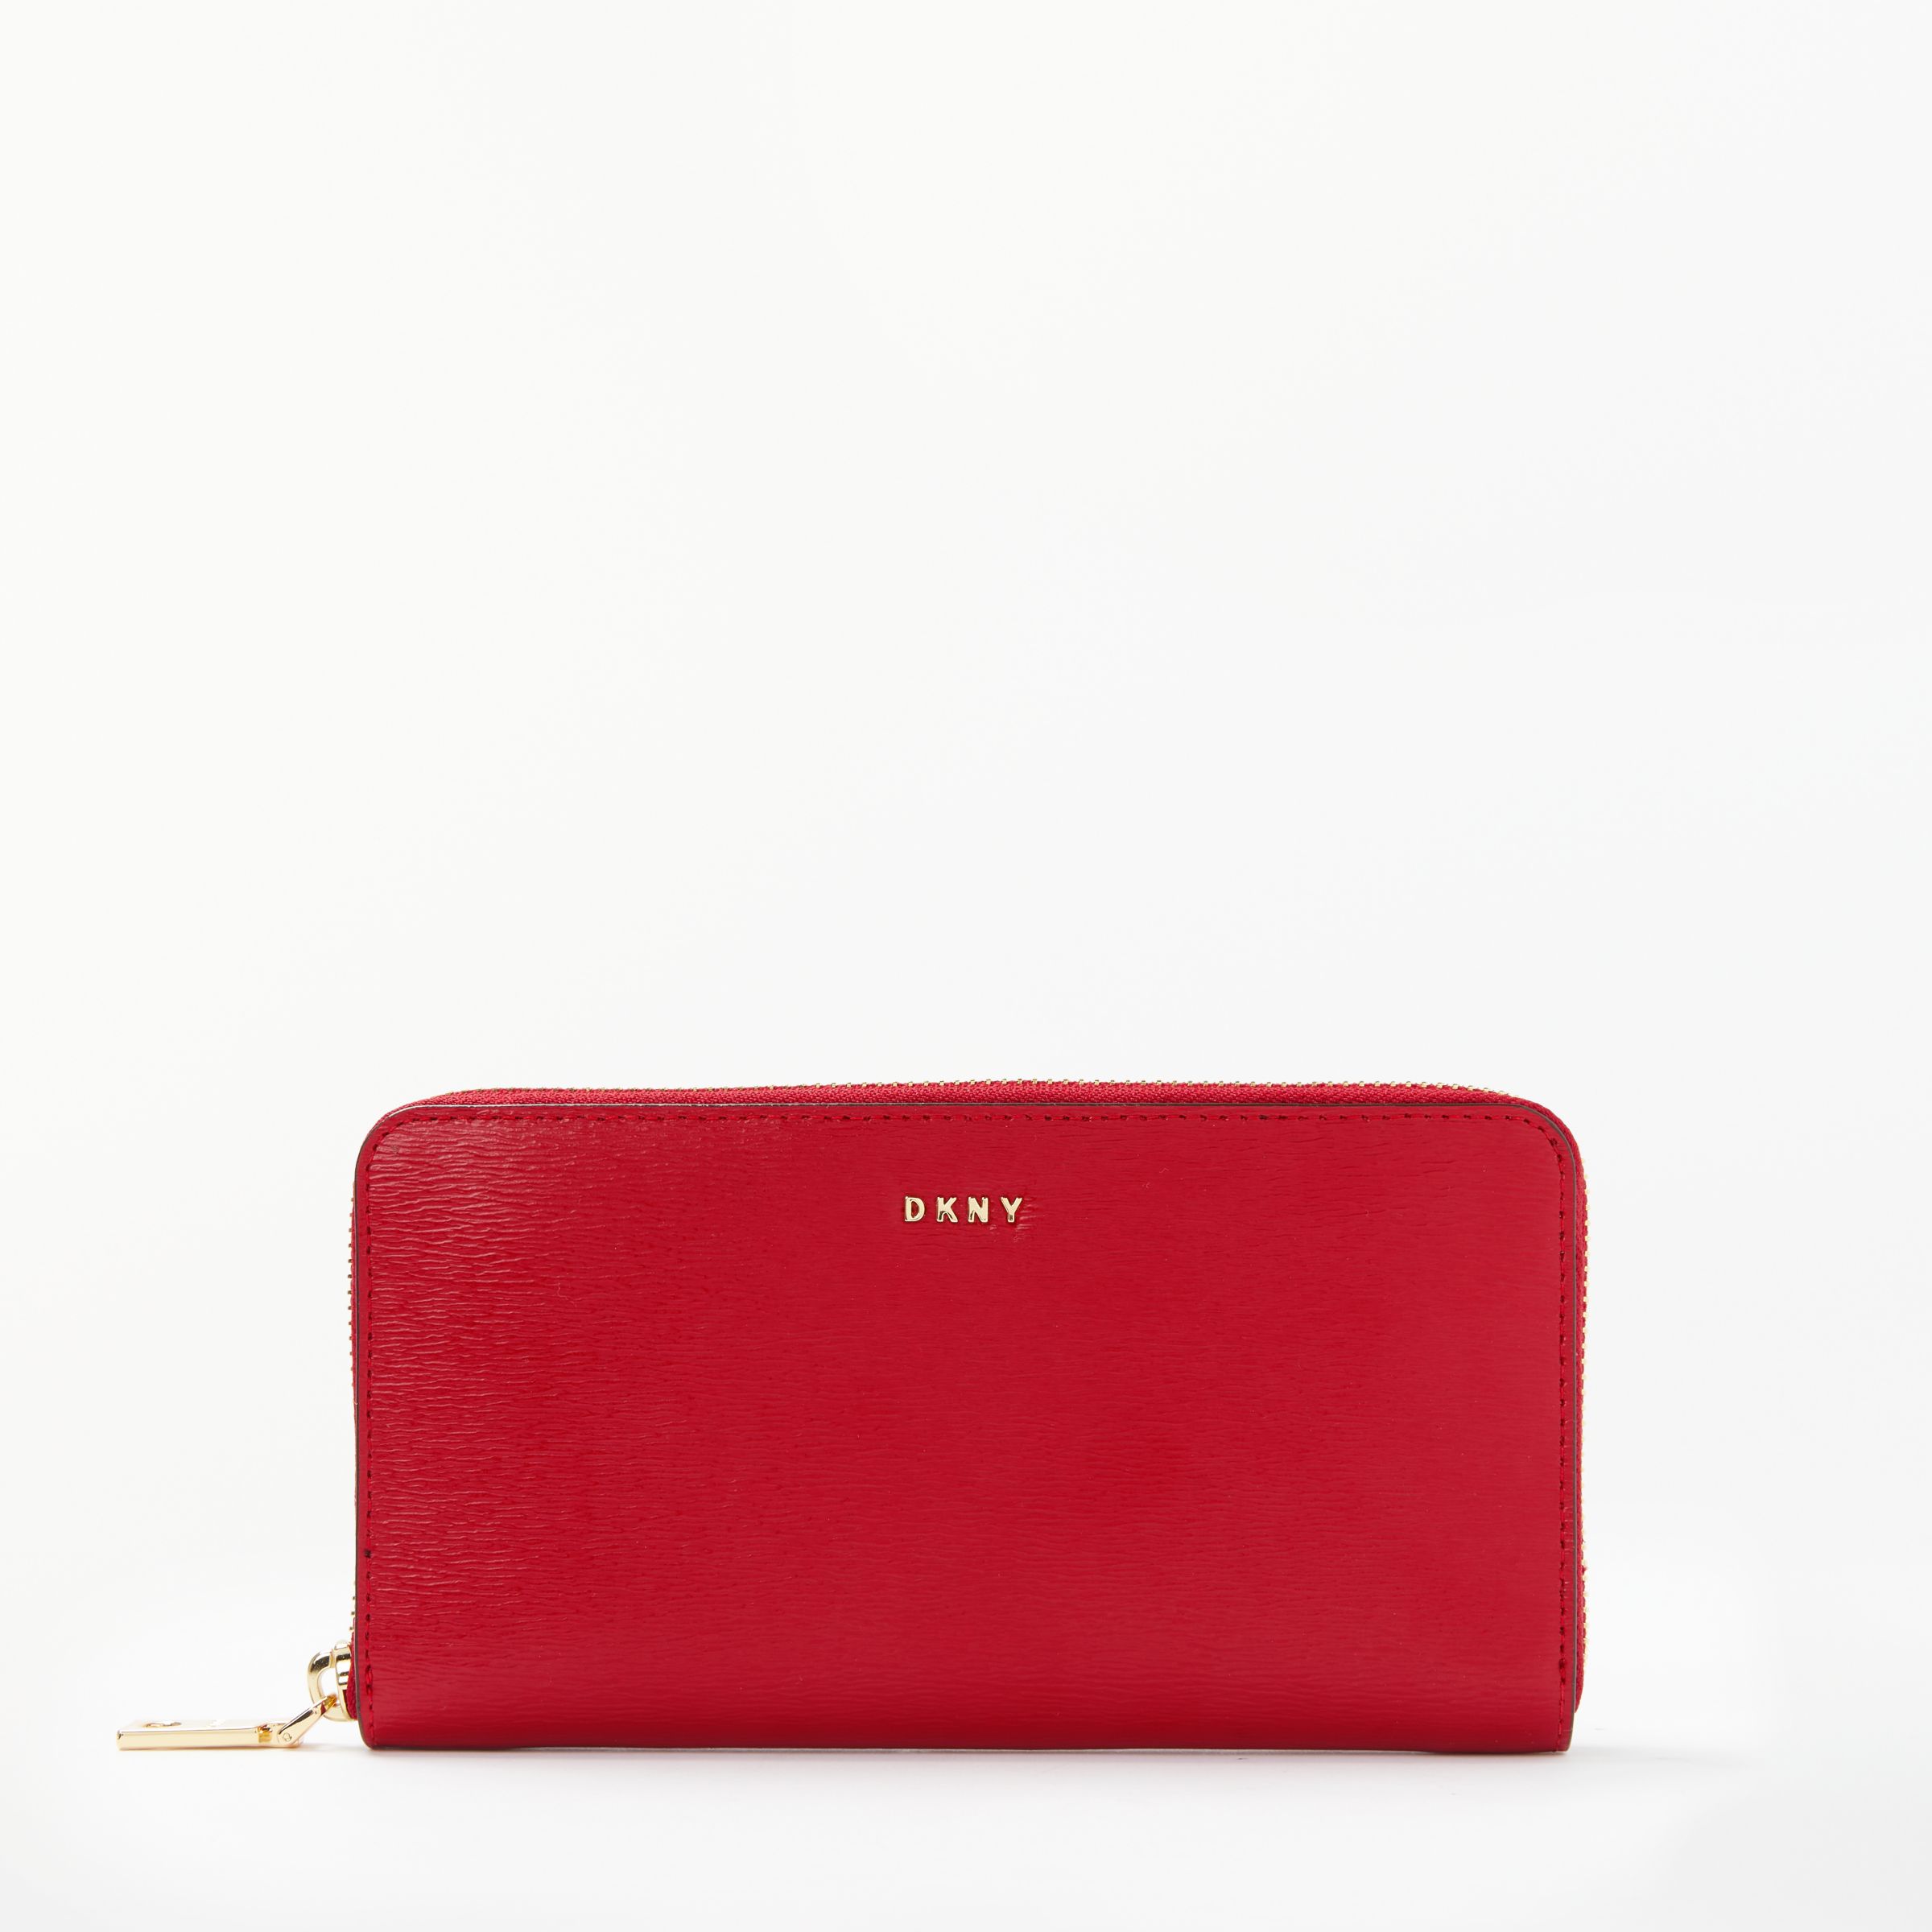 DKNY Red Leather Bryant Park Bag - ShopStyle